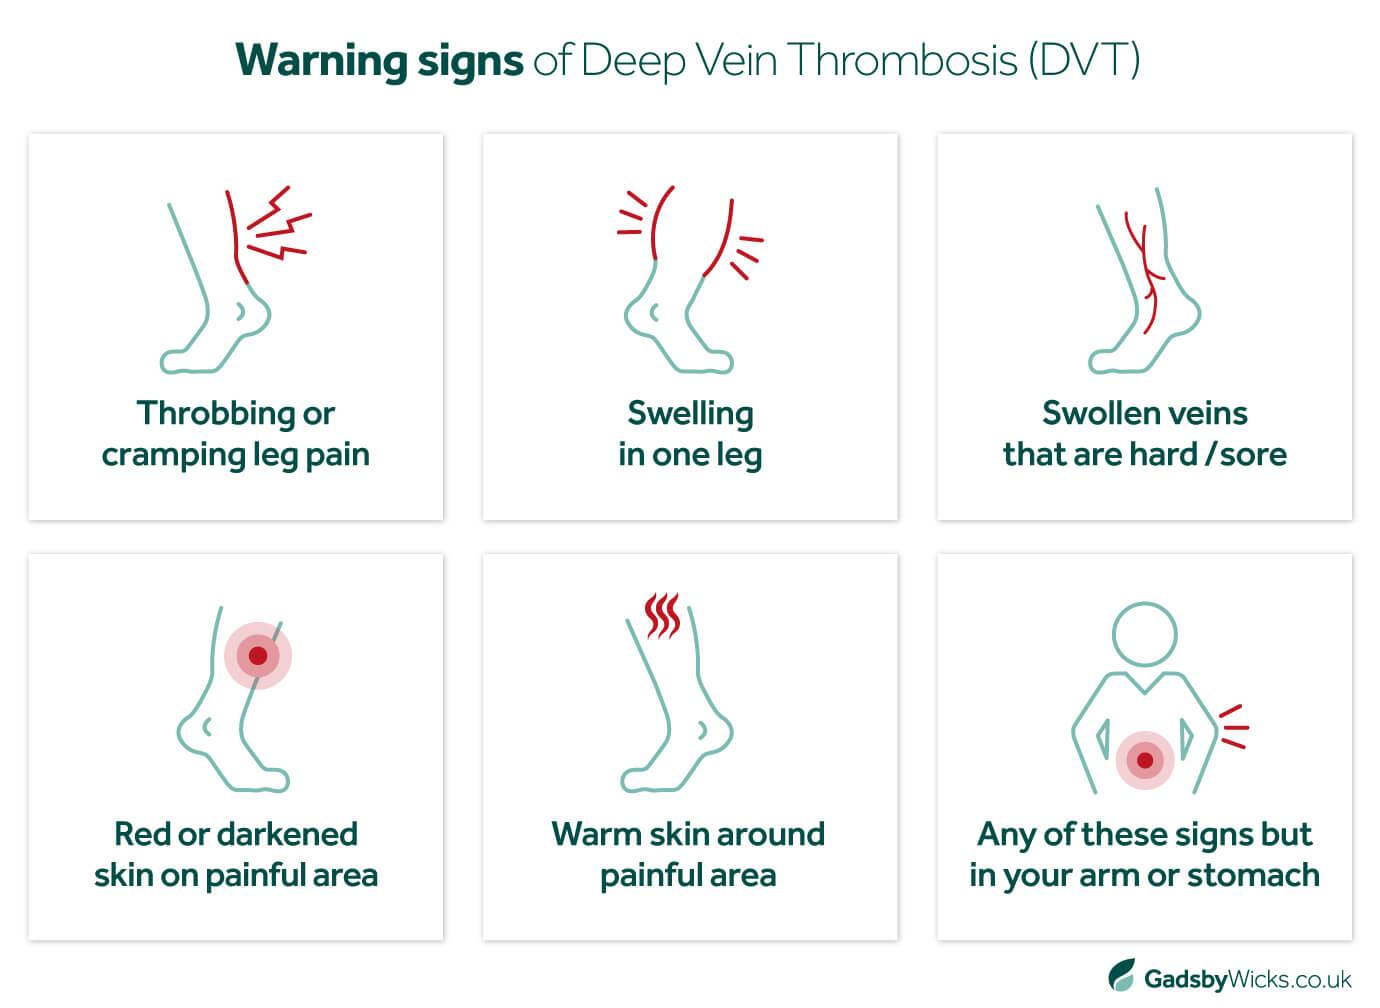 Warning Signs to Look Out For DVT (Deep Vein Thrombosis): Infographic